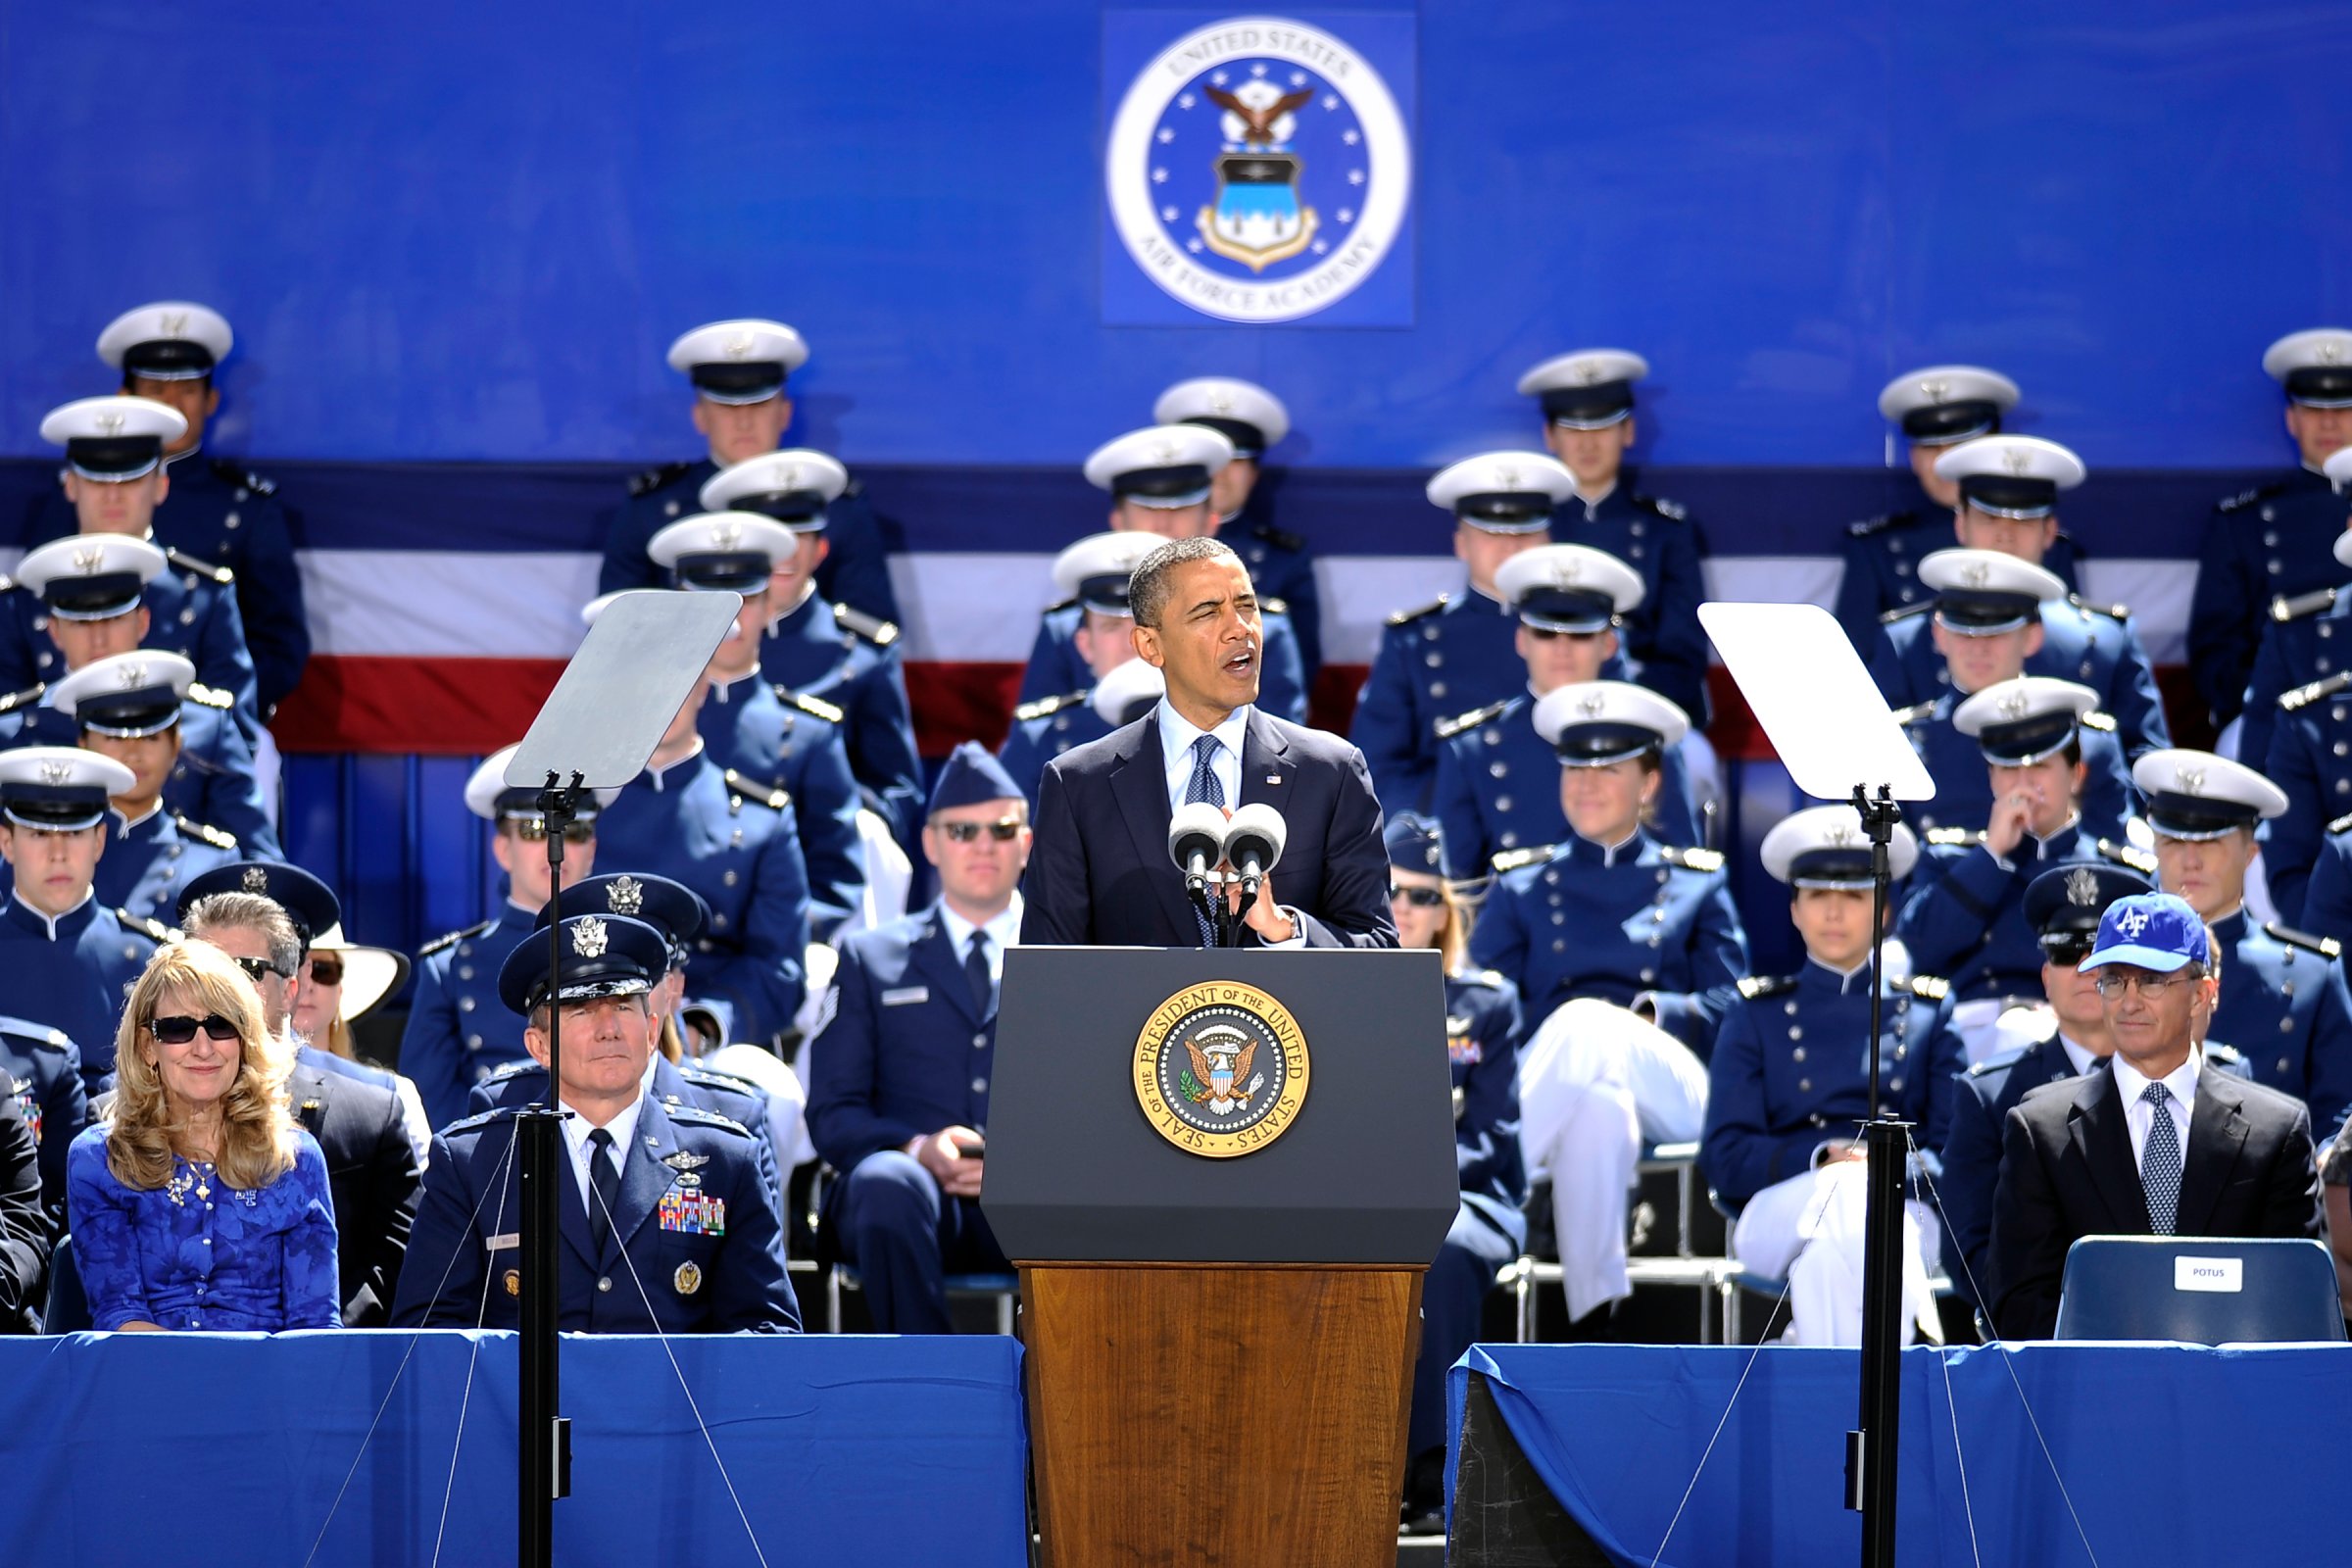 President Barack Obama speaks during the commencement ceremony at the United States Air Force Academy in Colorado Springs on Wednesday, May 23, 2012. Hyoung Chang, The Denver Post